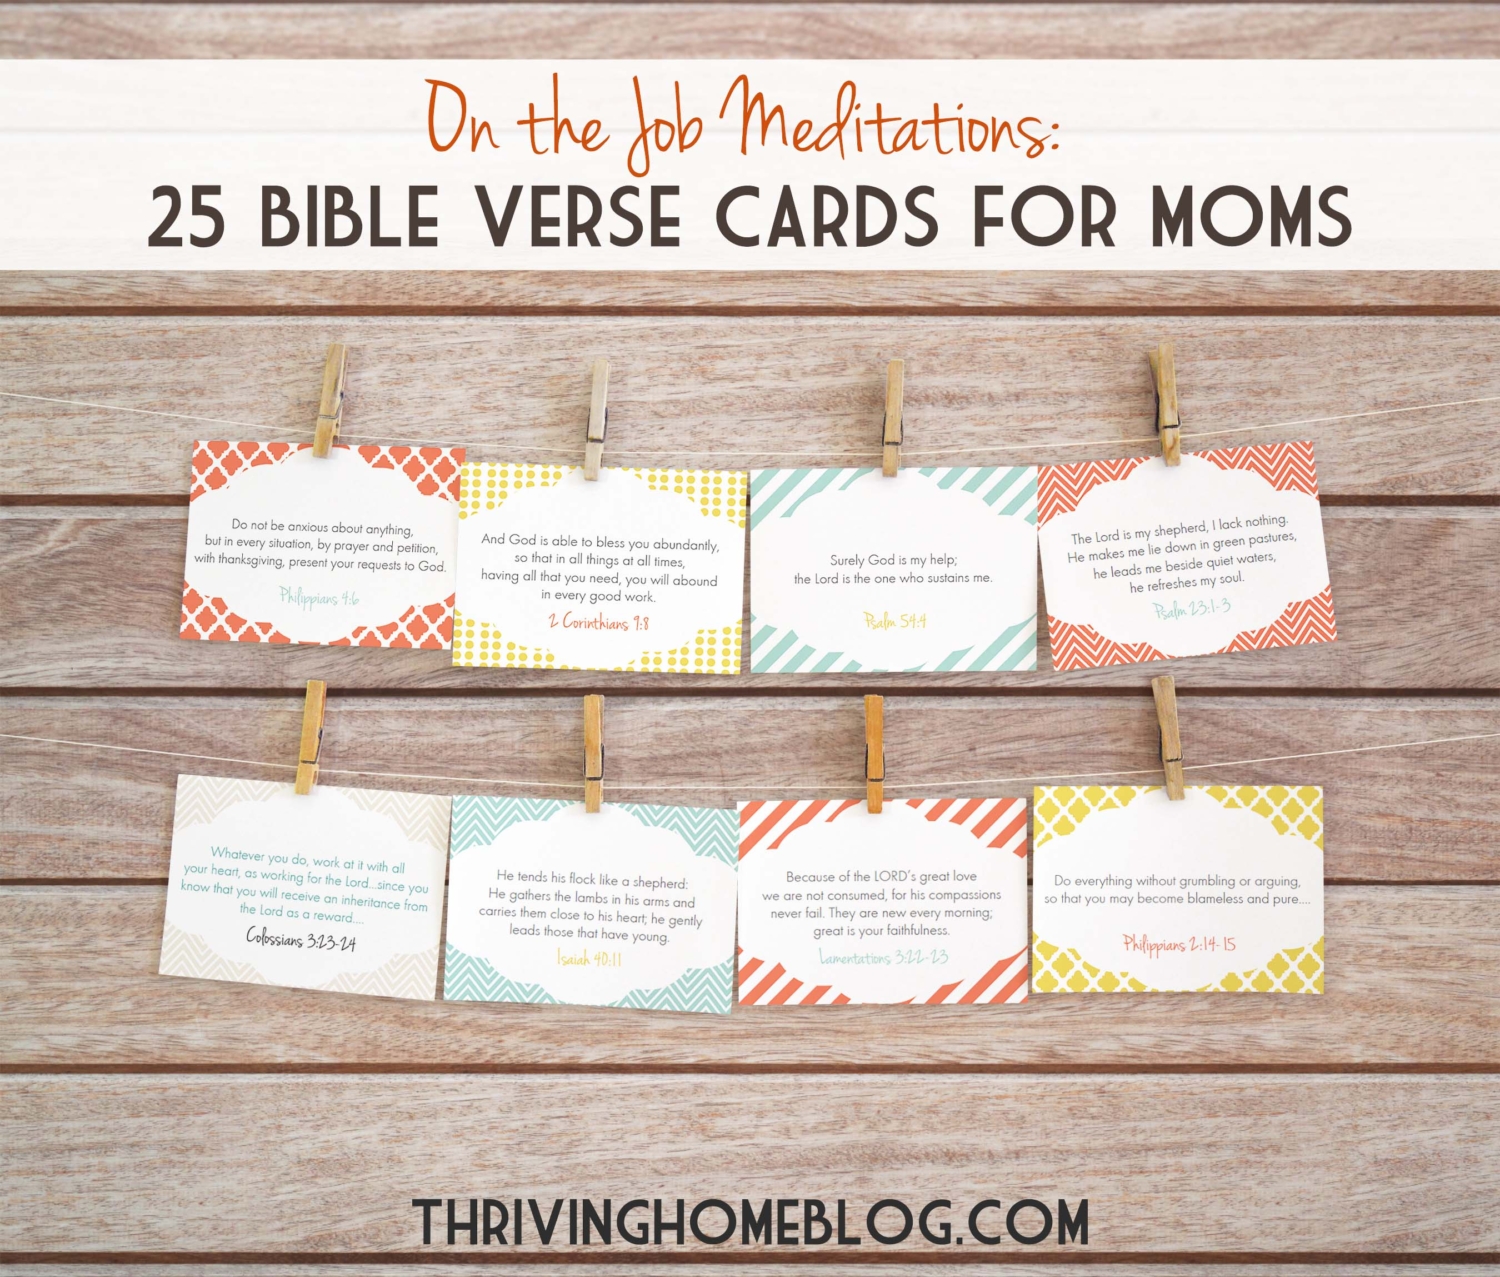 These printable 25 Encouraging Bible Verses for Moms (NIV version) are designed to help you get creative in your time with God, allowing you to practice 